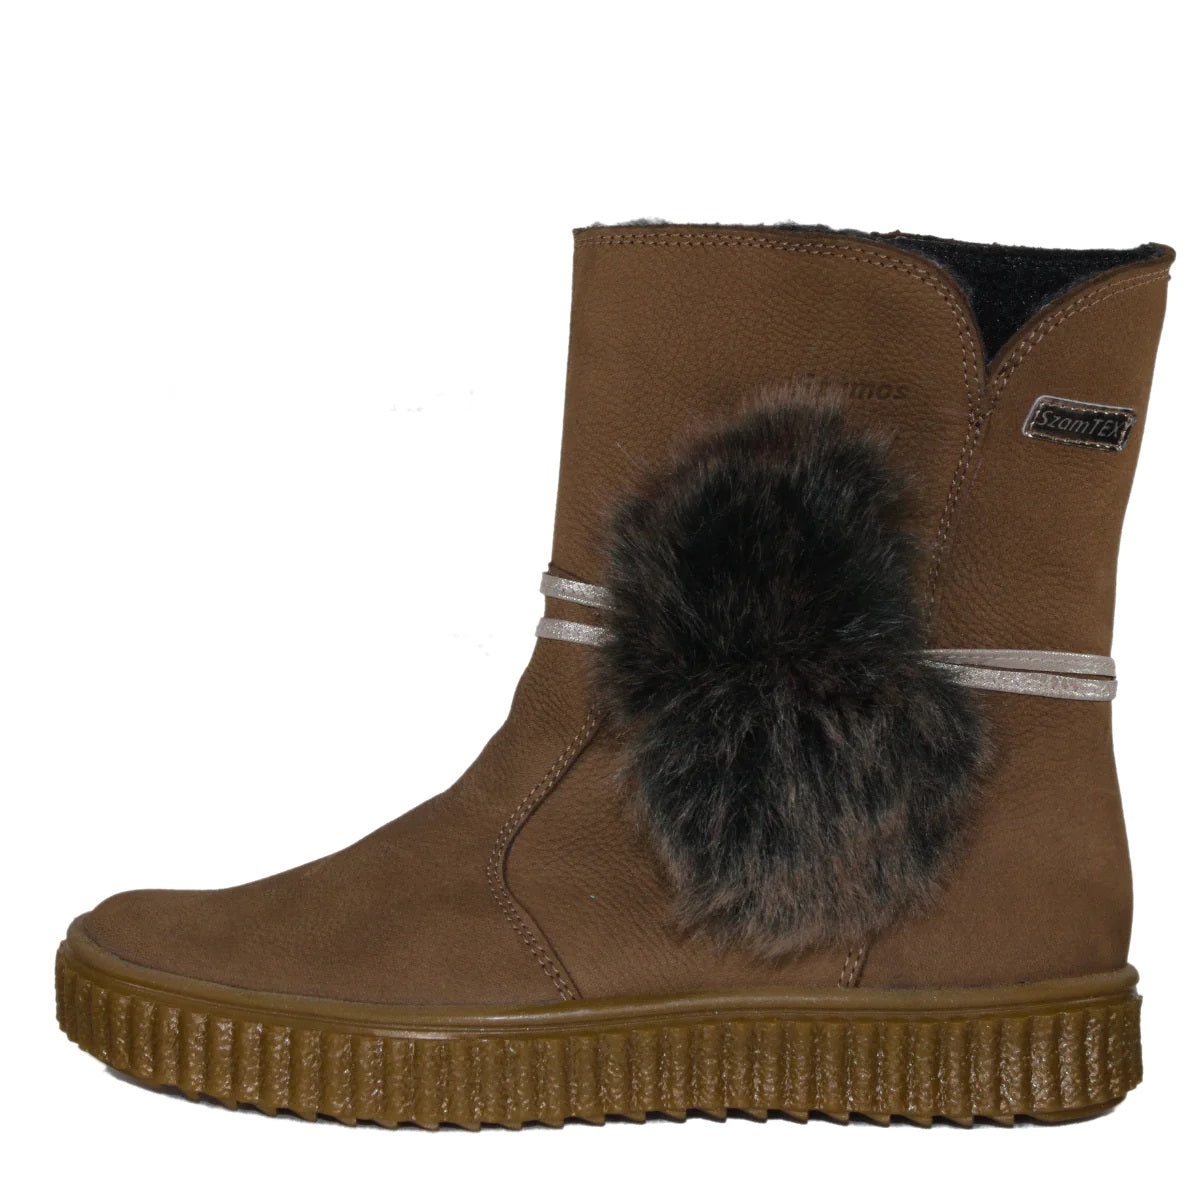 Szamos kid girl winter boots brown with pom pom and side zipper big kid size